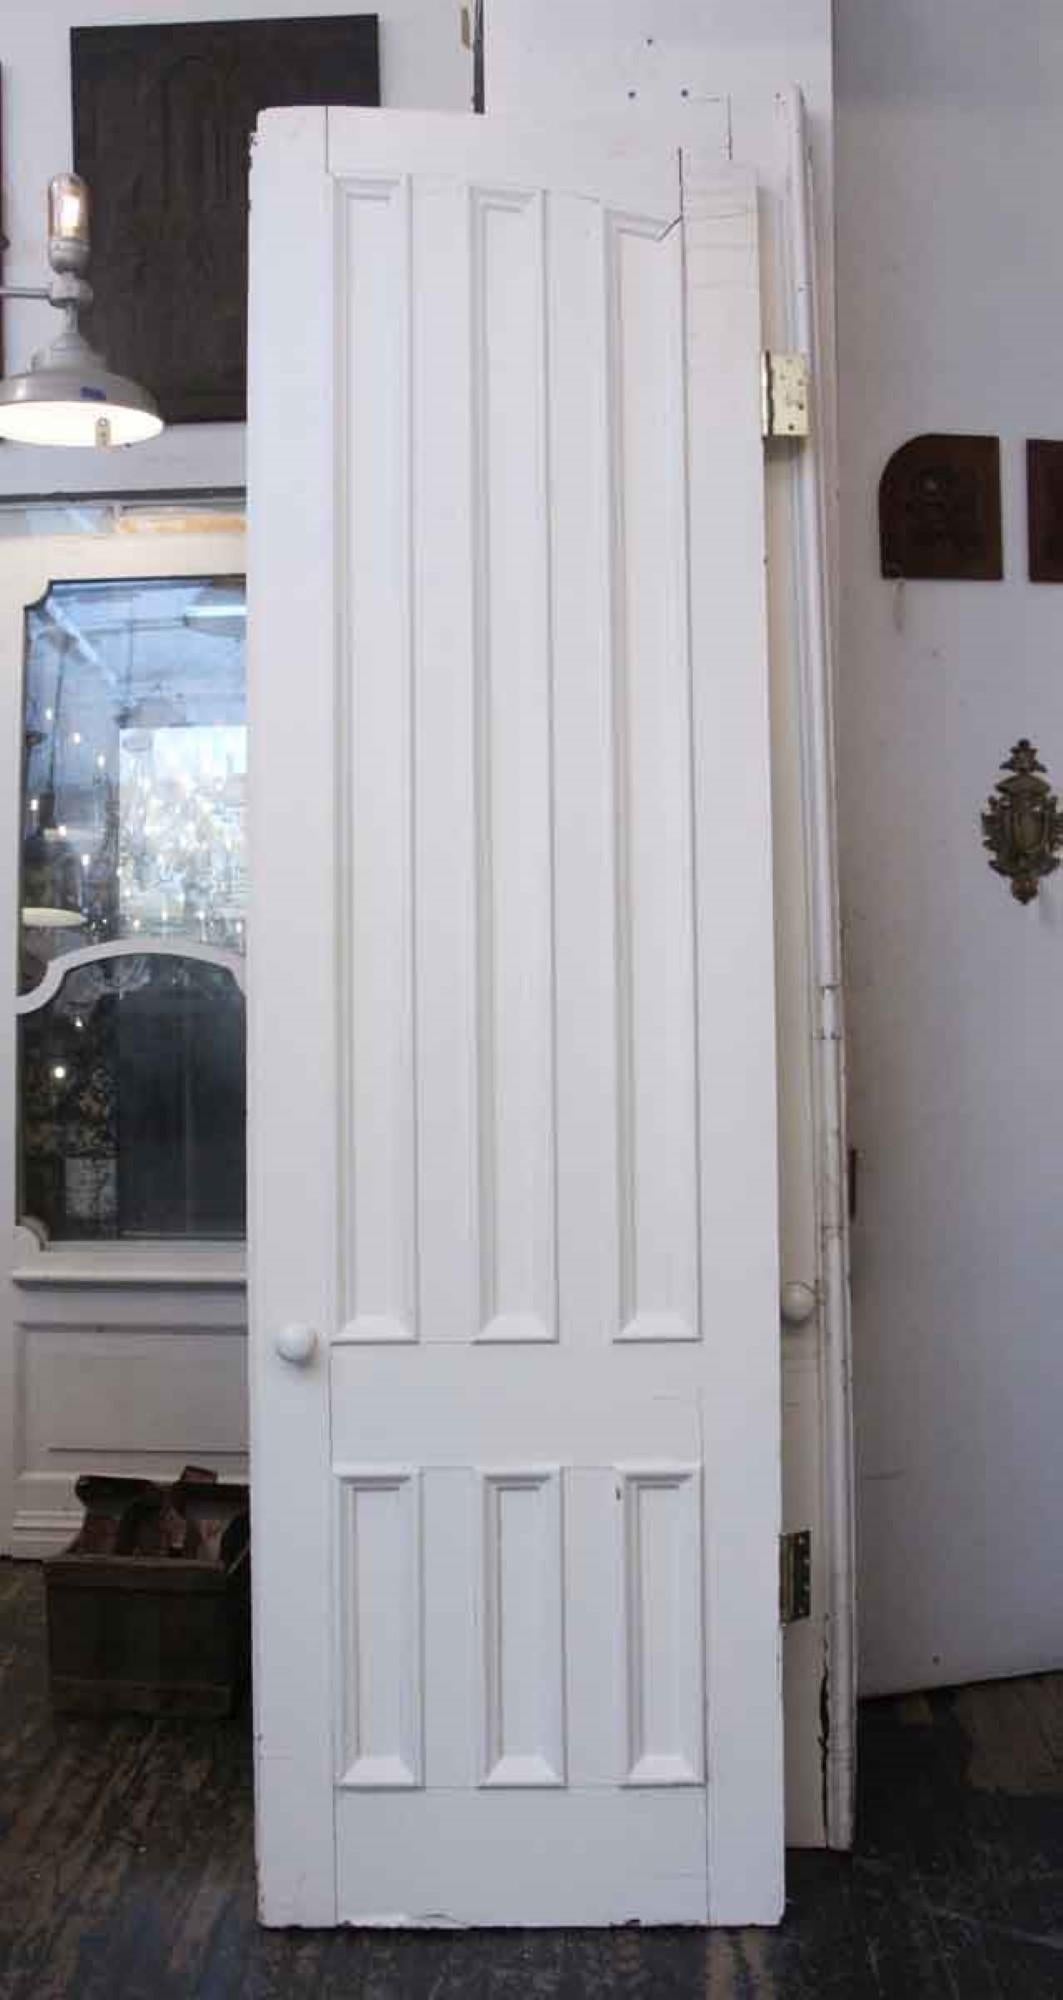 Late 19th Century 1880s Pair of Arched Tall Recessed Panel Parlor Doors